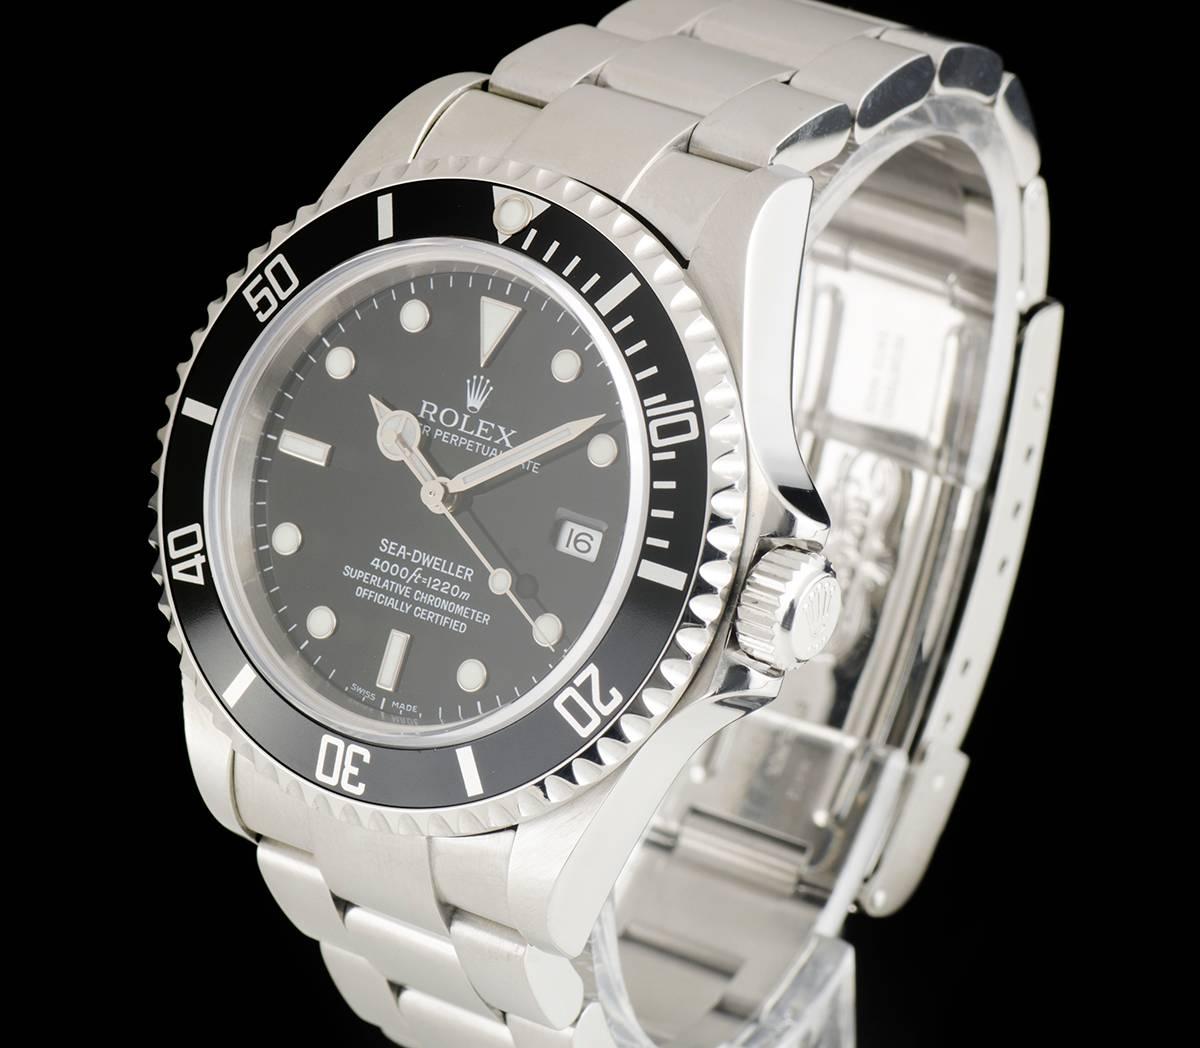 A Stainless Steel Oyster Perpetual Sea-Dweller Gents Wristwatch, black dial with applied hour markers, date at 3 0'clock, a stainless steel uni-directional rotating bezel with a black bezel insert, a stainless steel oyster bracelet with a stainless